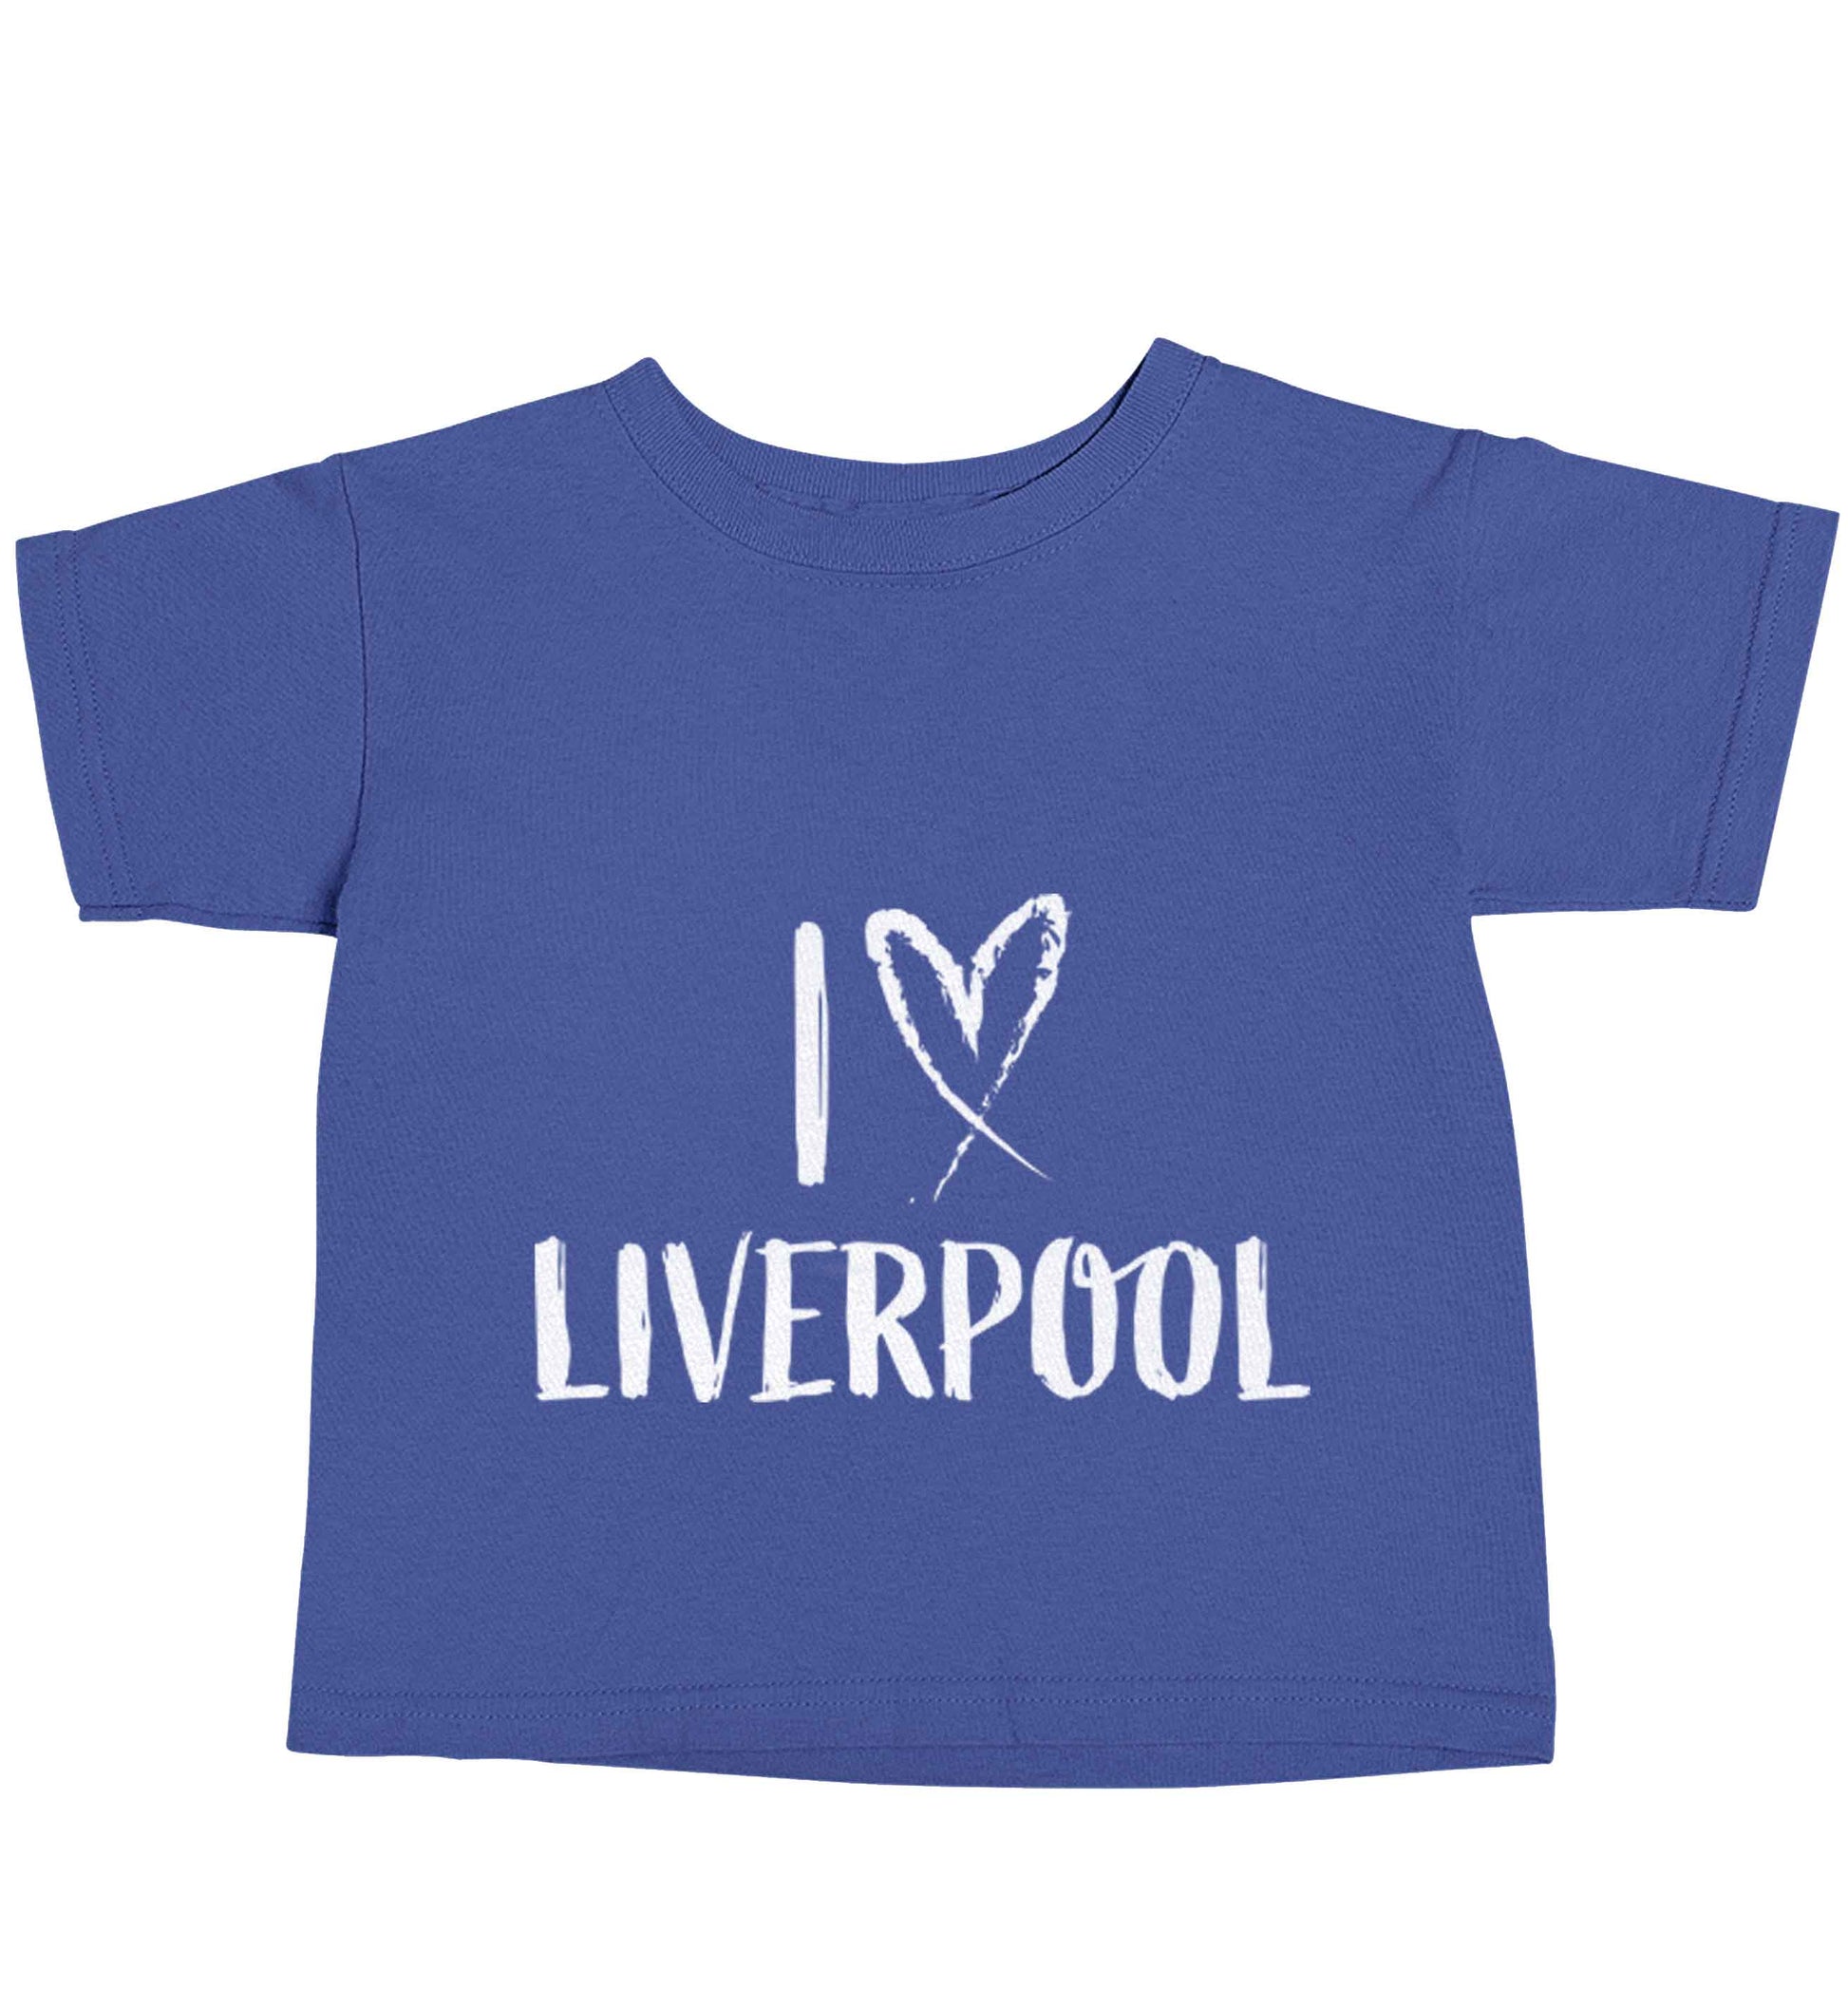 I love Liverpool blue baby toddler Tshirt 2 Years